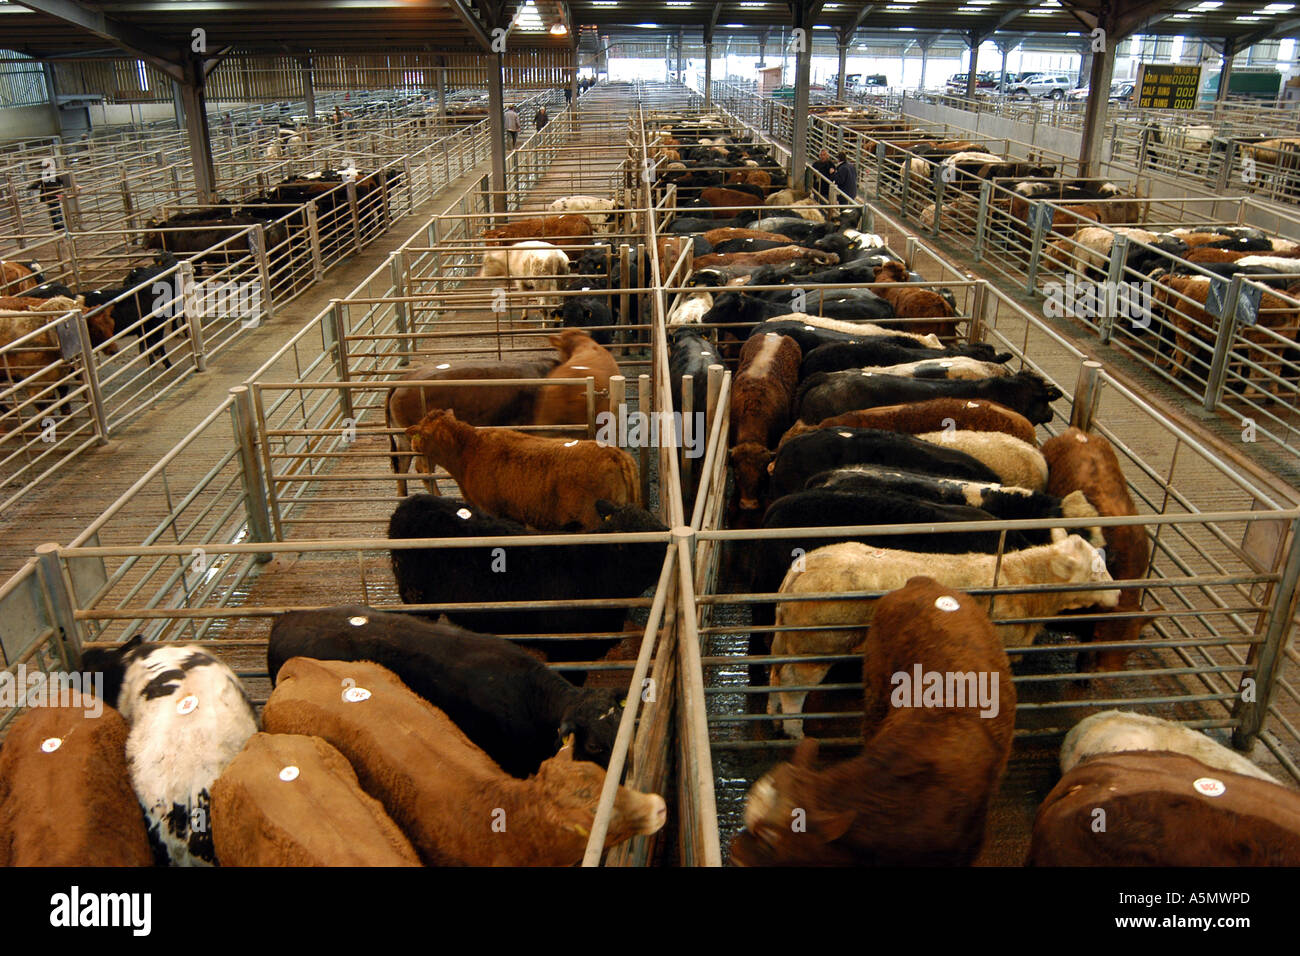 https://c8.alamy.com/comp/A5MWPD/cattle-are-stored-in-pens-prior-to-the-cattle-auction-at-skipton-auction-A5MWPD.jpg